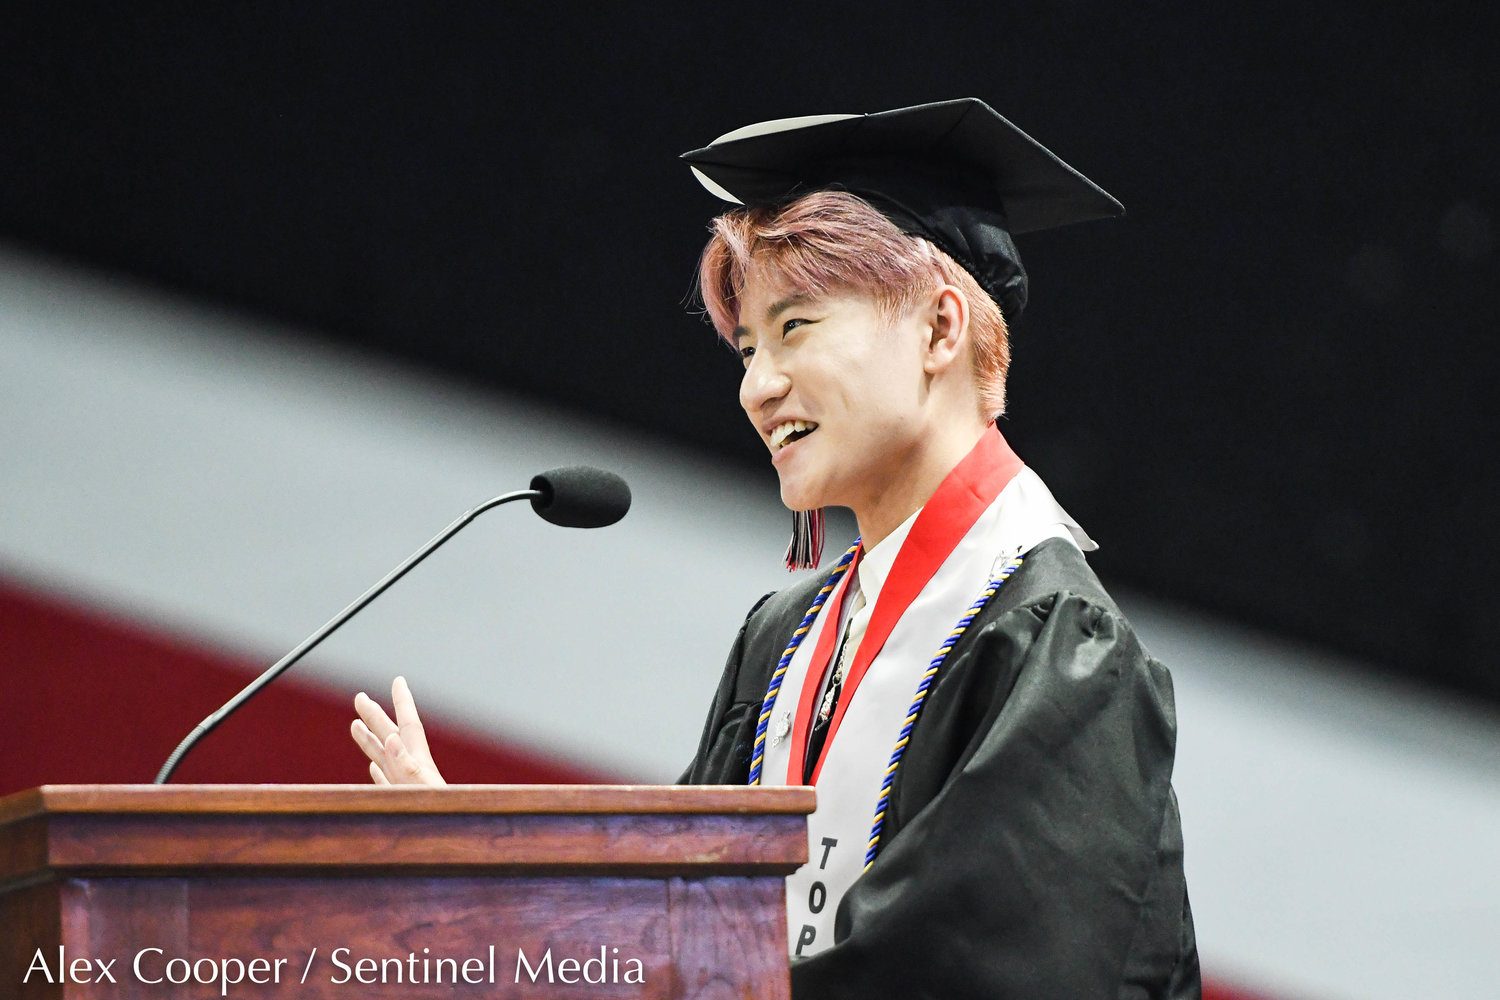 Valedictorian John Nguyen speaks during the annual commencement ceremony for Thomas R. Proctor High School on Friday at the Adirondack Bank Center at the Utica Memorial Auditorium.